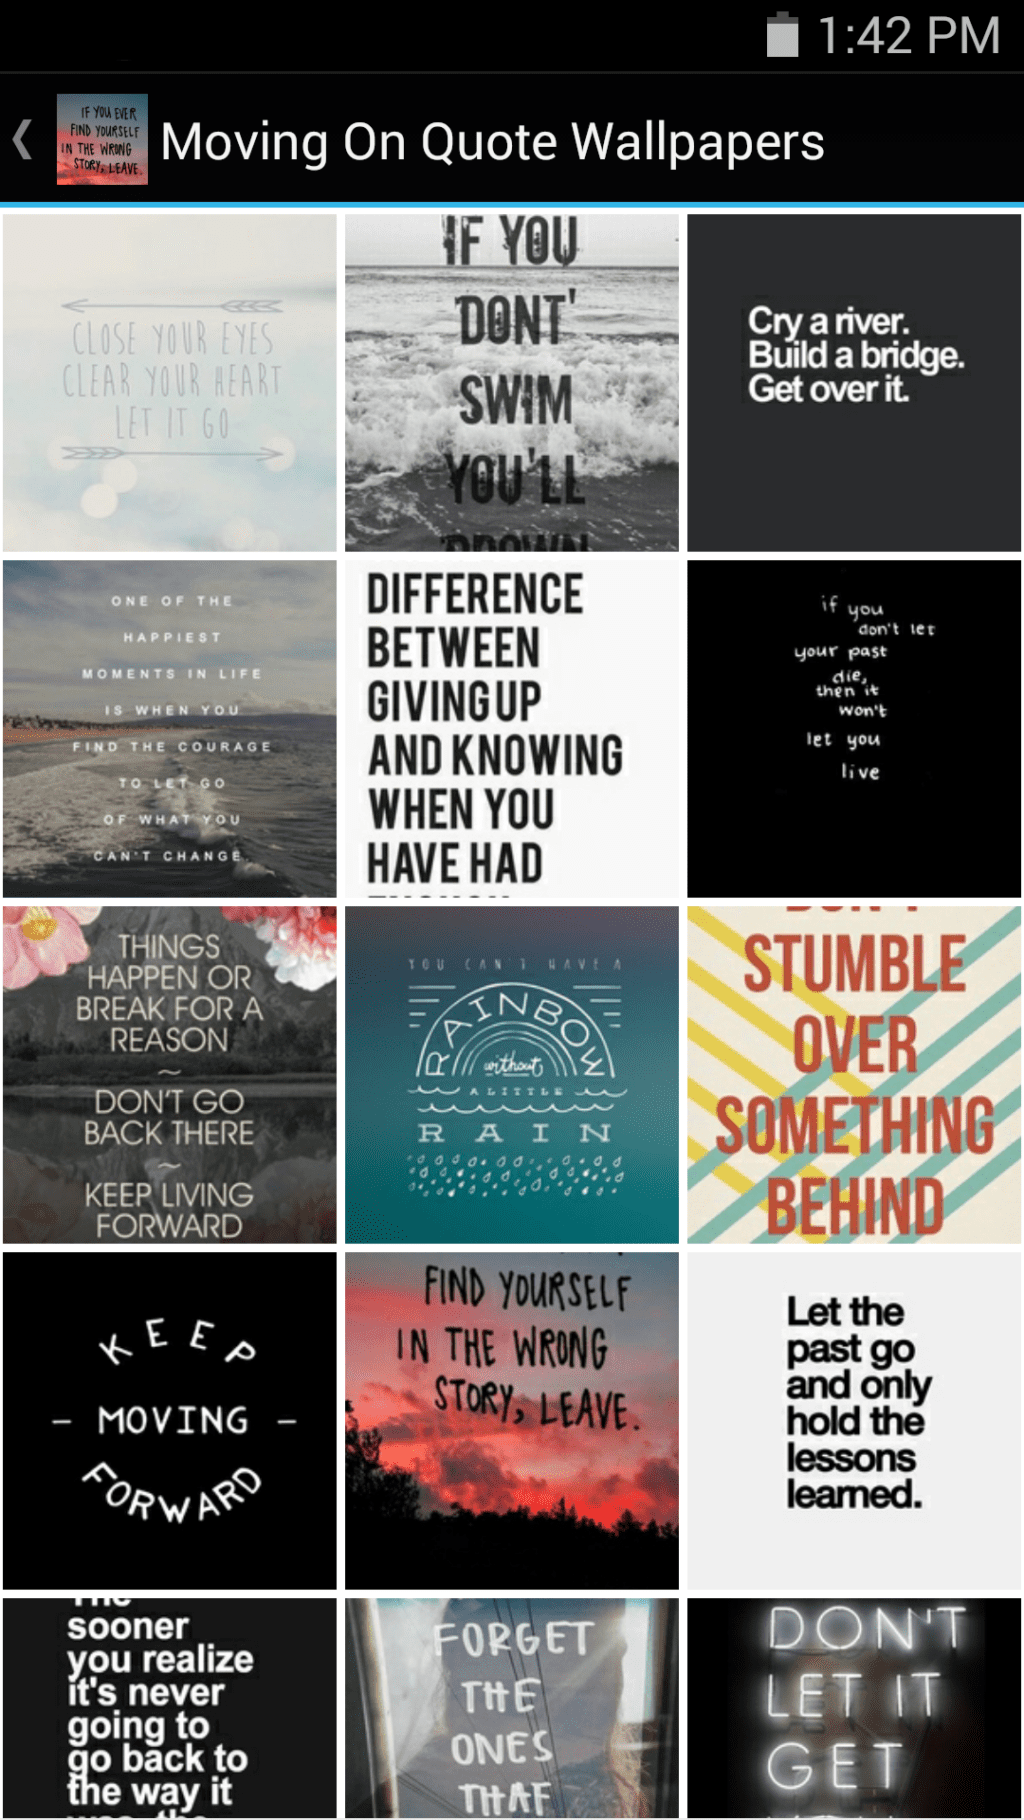 Moving On Quote Wallpapers